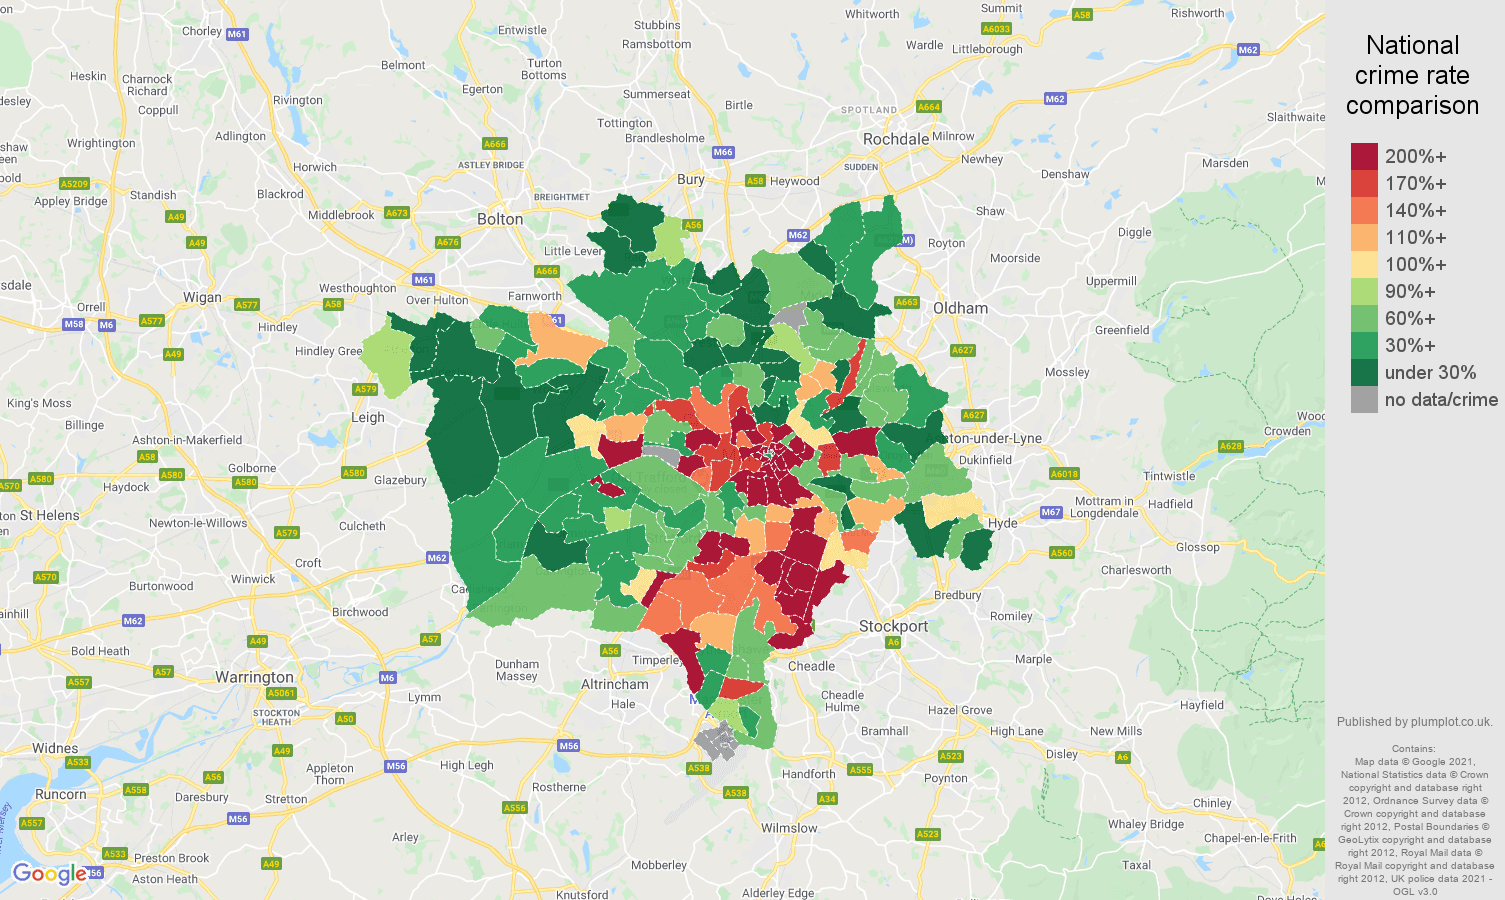 Manchester bicycle theft crime rate comparison map